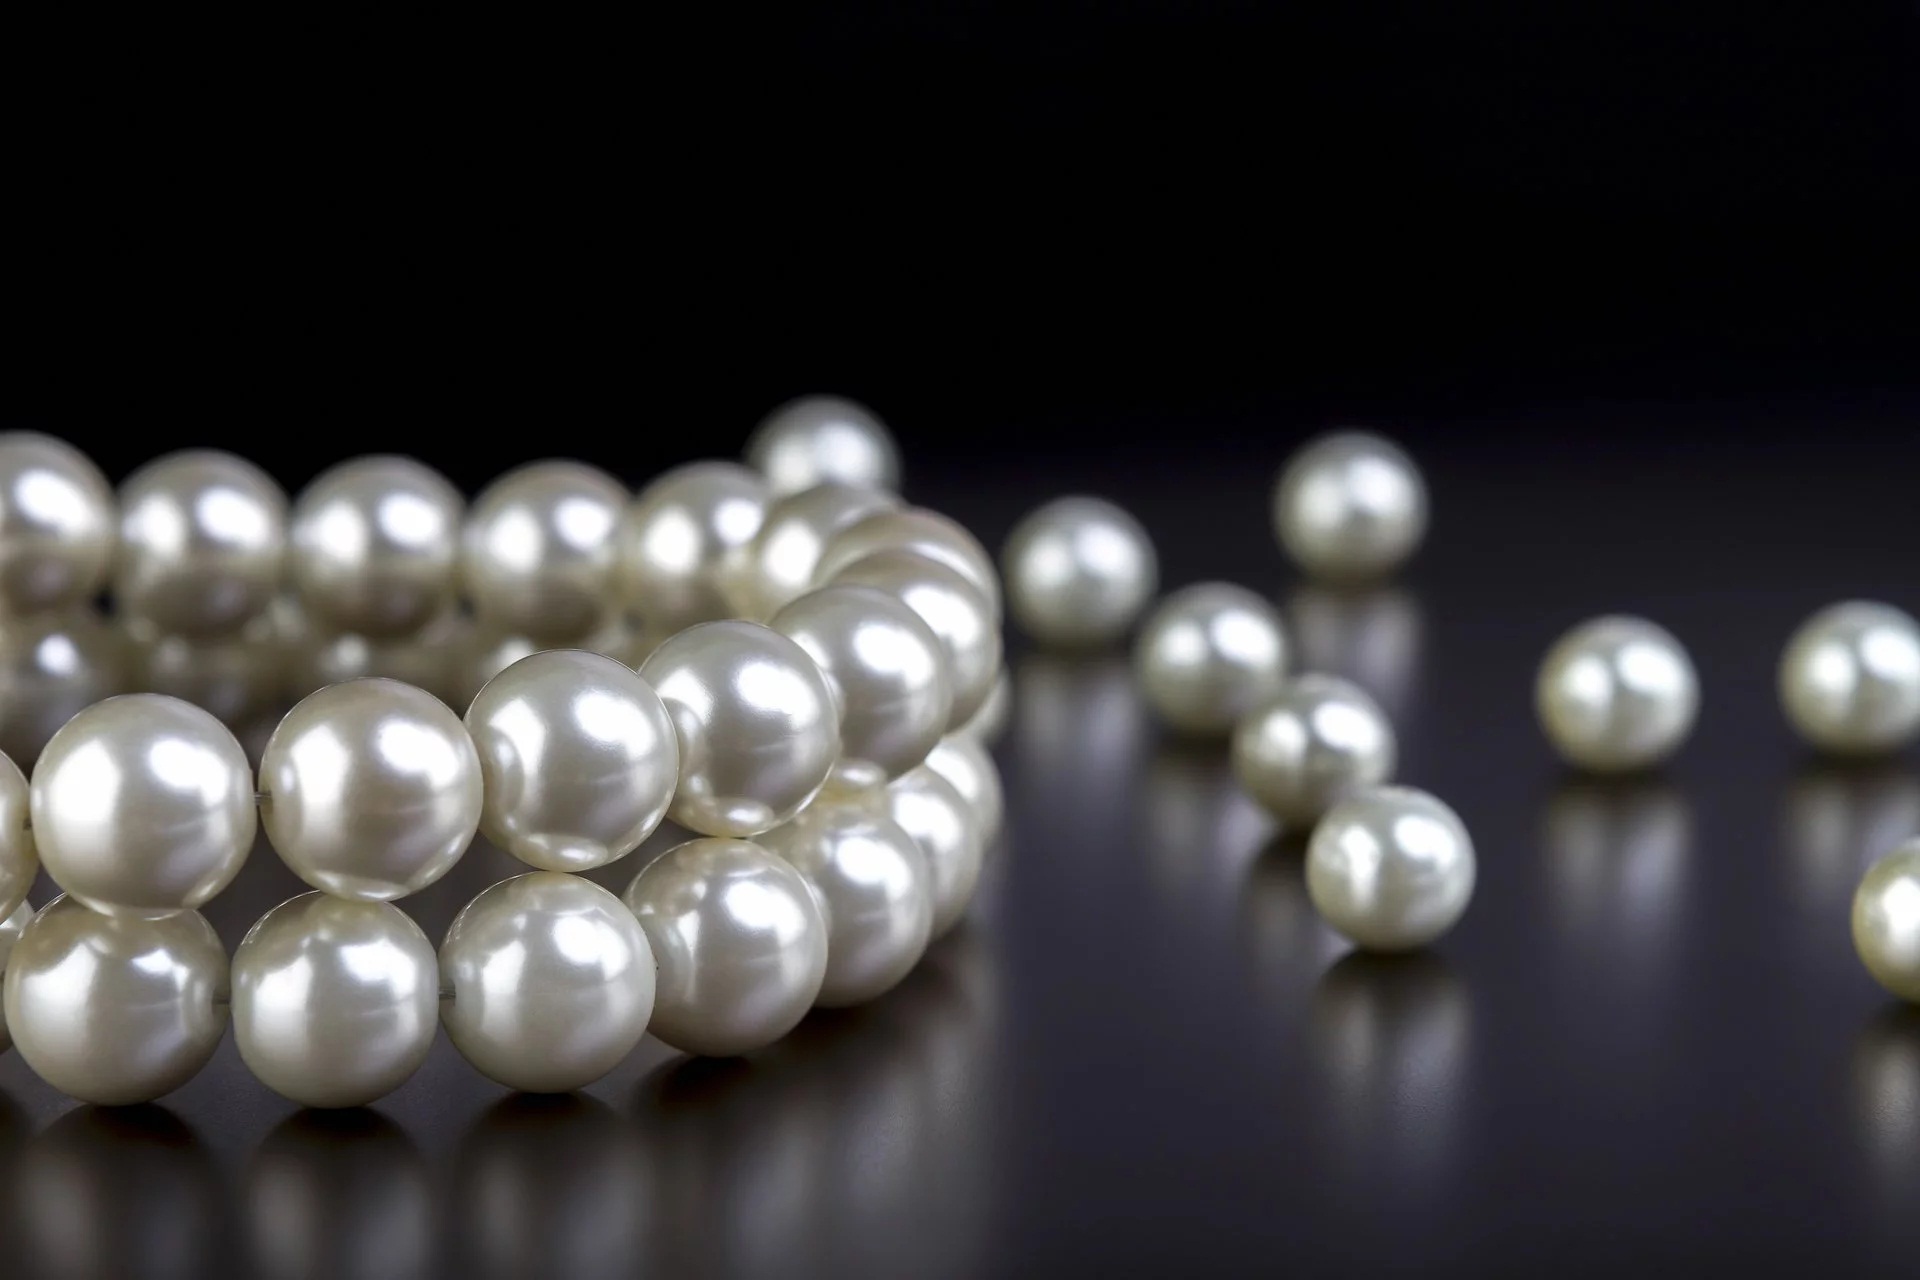 Understanding the Essential Attributes That Make Pearls a Precious Gem